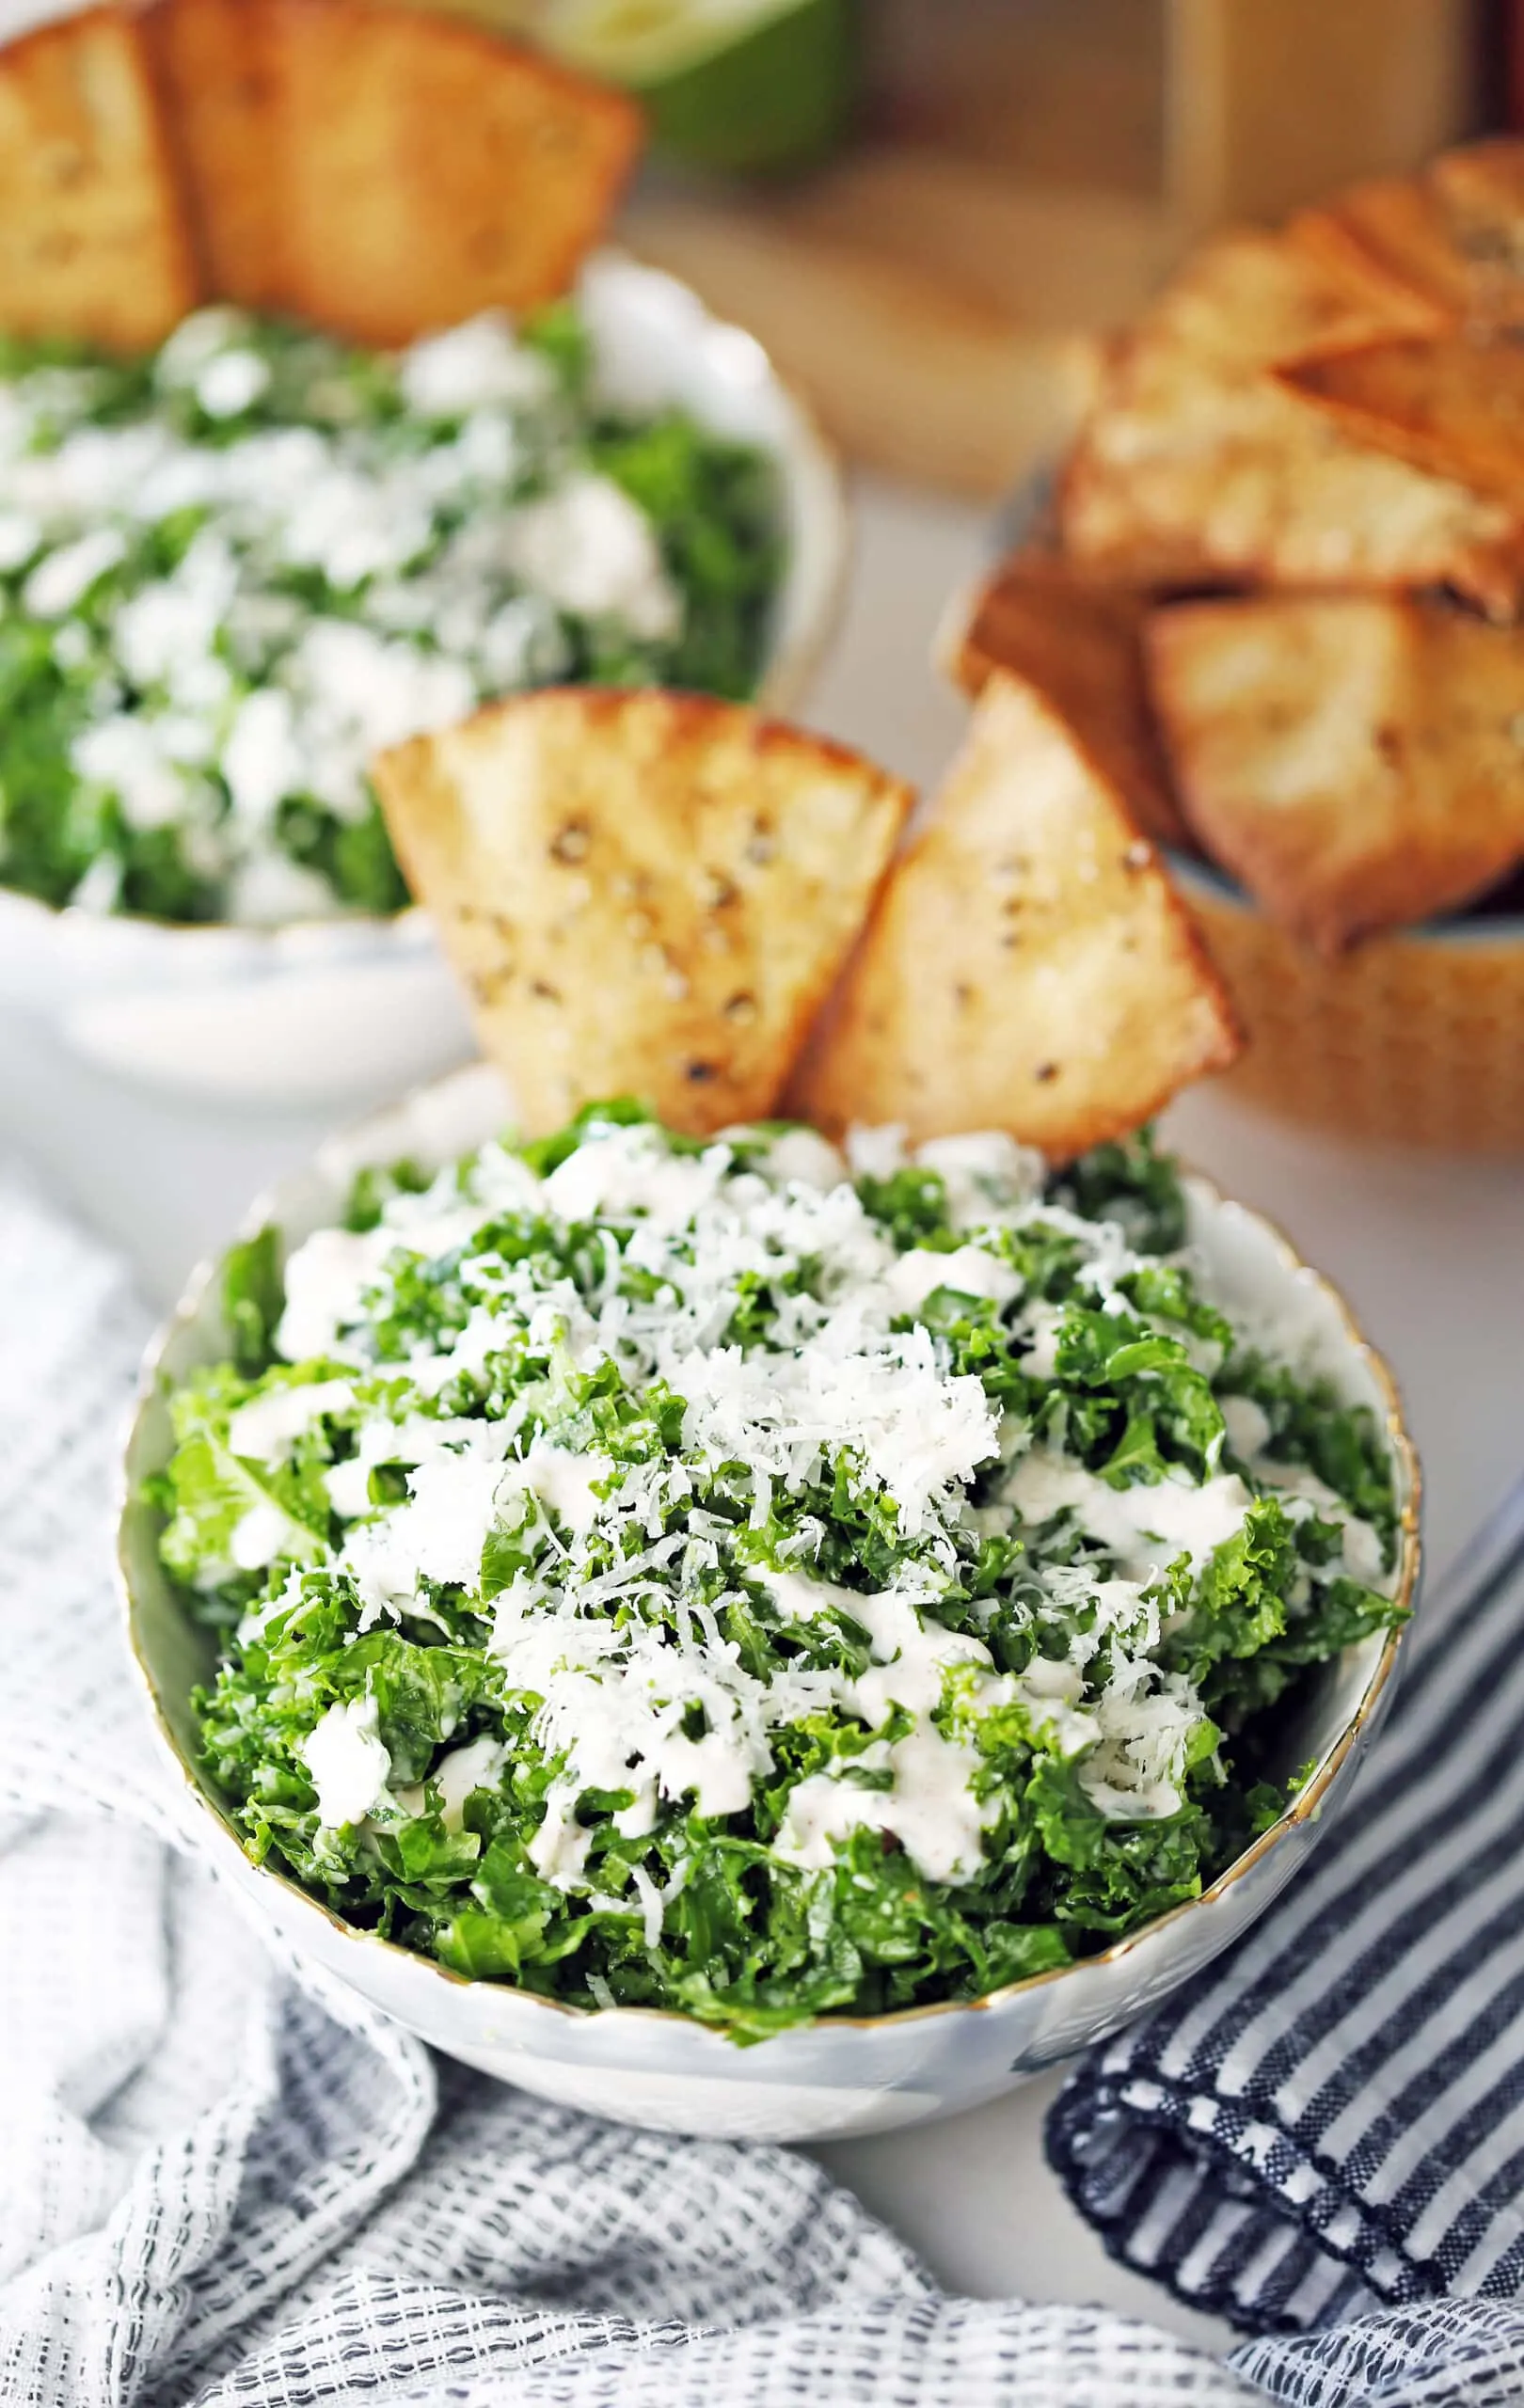 A bowl full of kale salad with parmesan, garlic lime dressing, and pita chips.